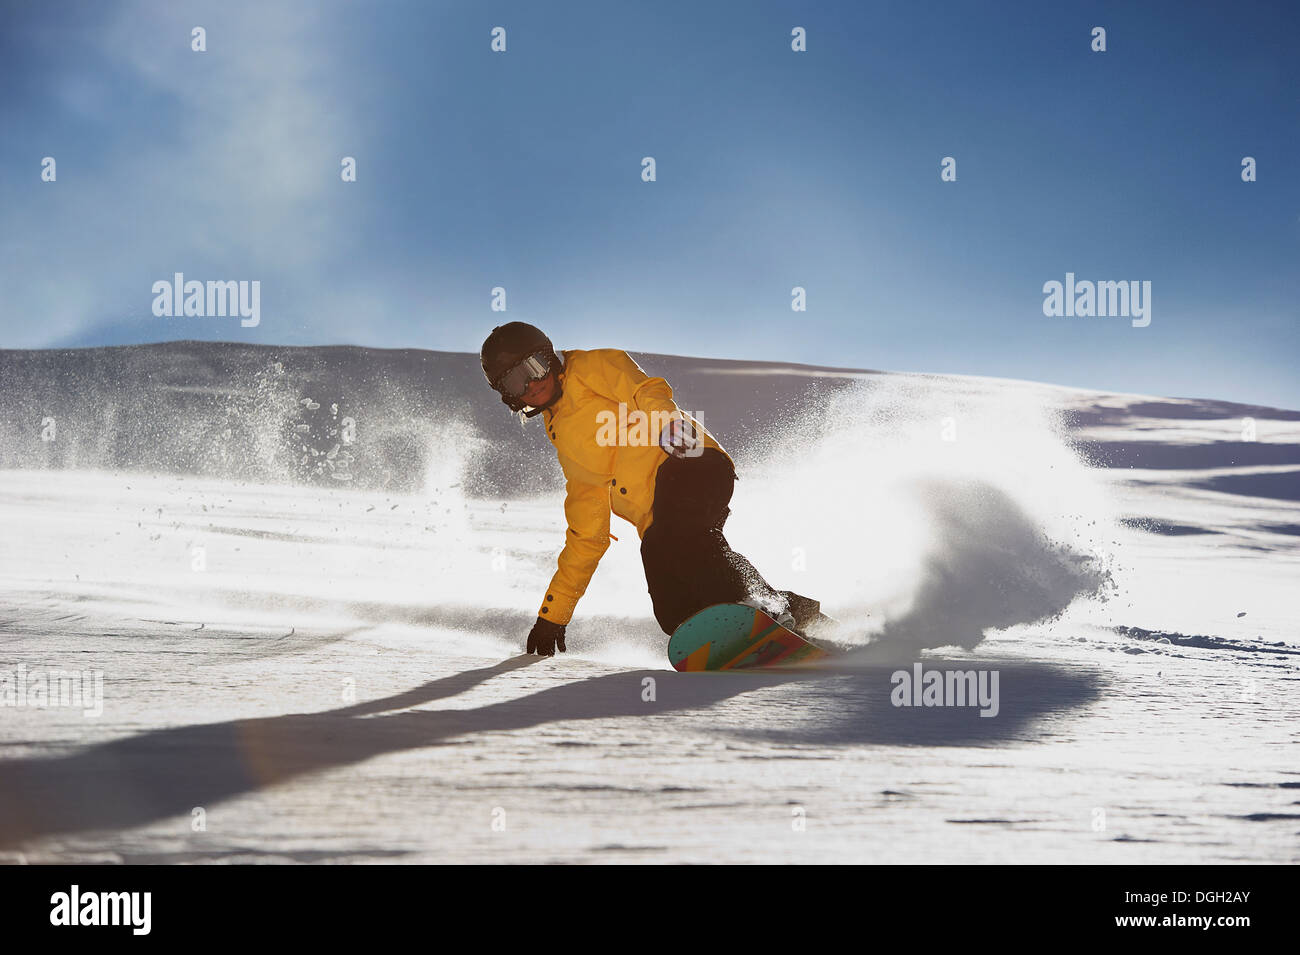 Young woman snowboarding Stock Photo